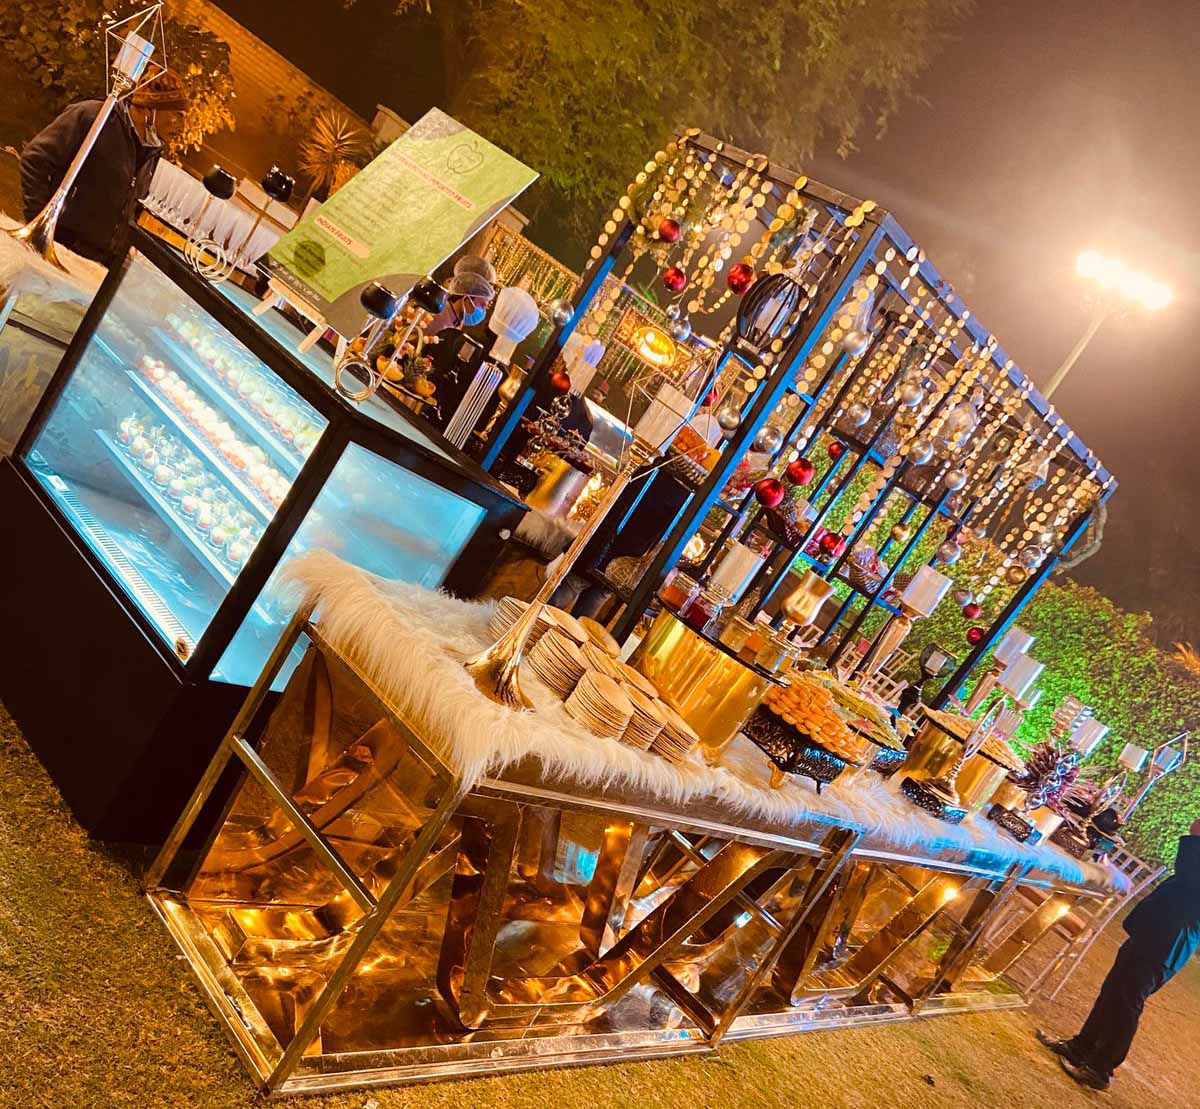 Catering Category Vendor Gallery 16 Laxmi Food & Caterers